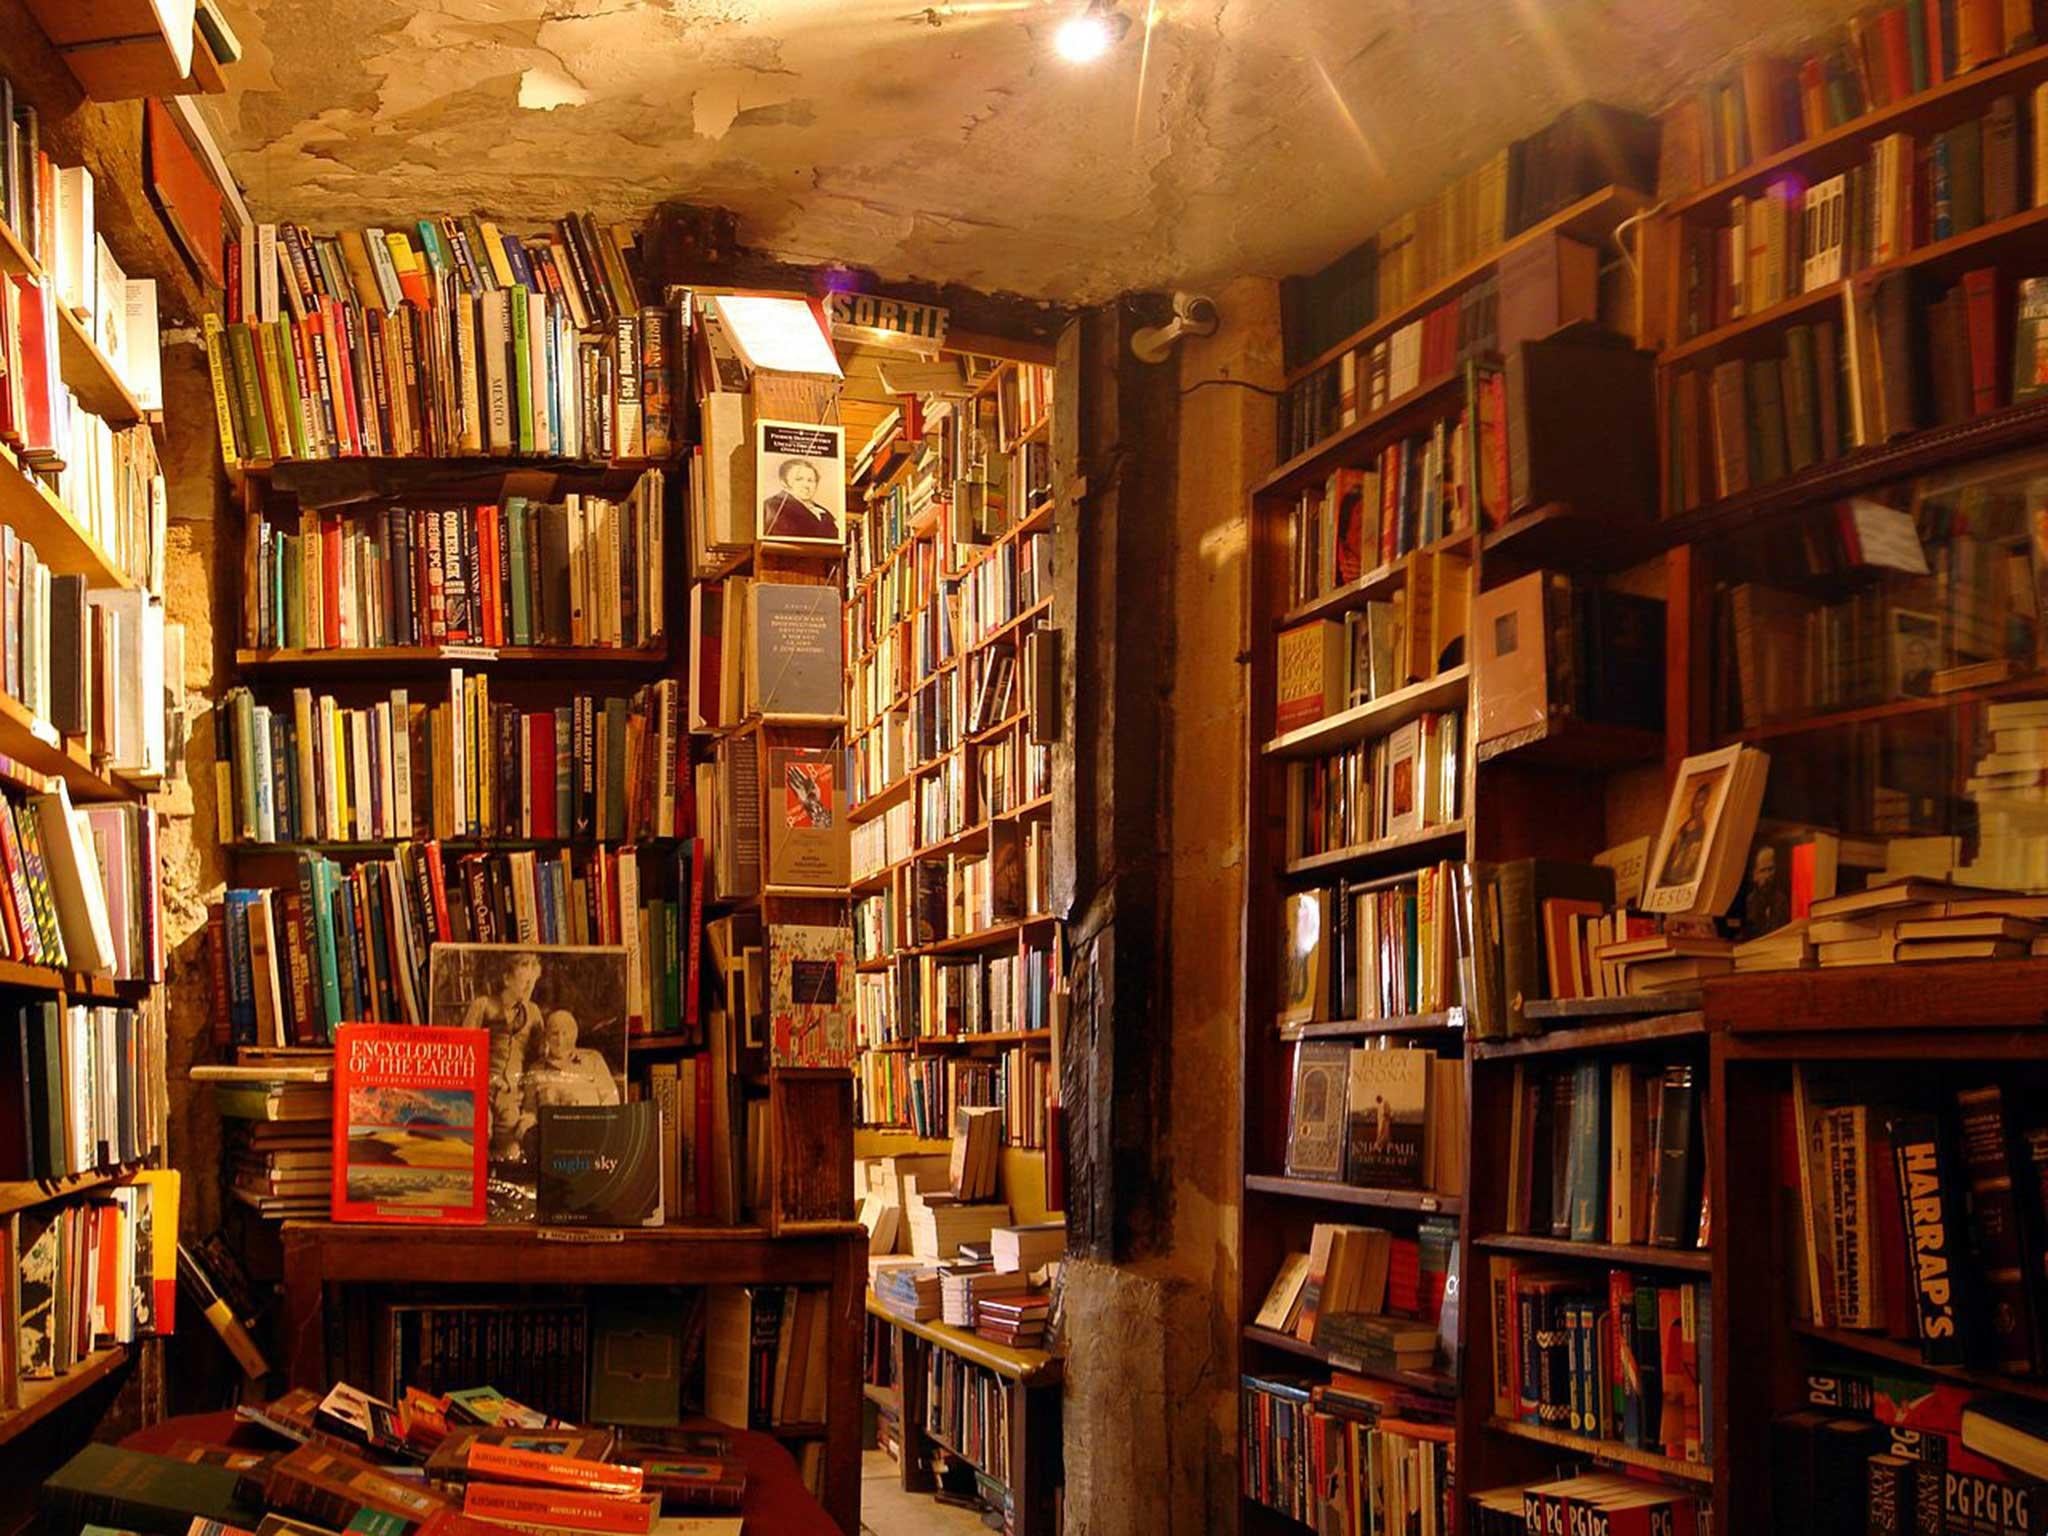 Shakespeare and Co: The world's most famous bookshop at 100 - BBC Culture